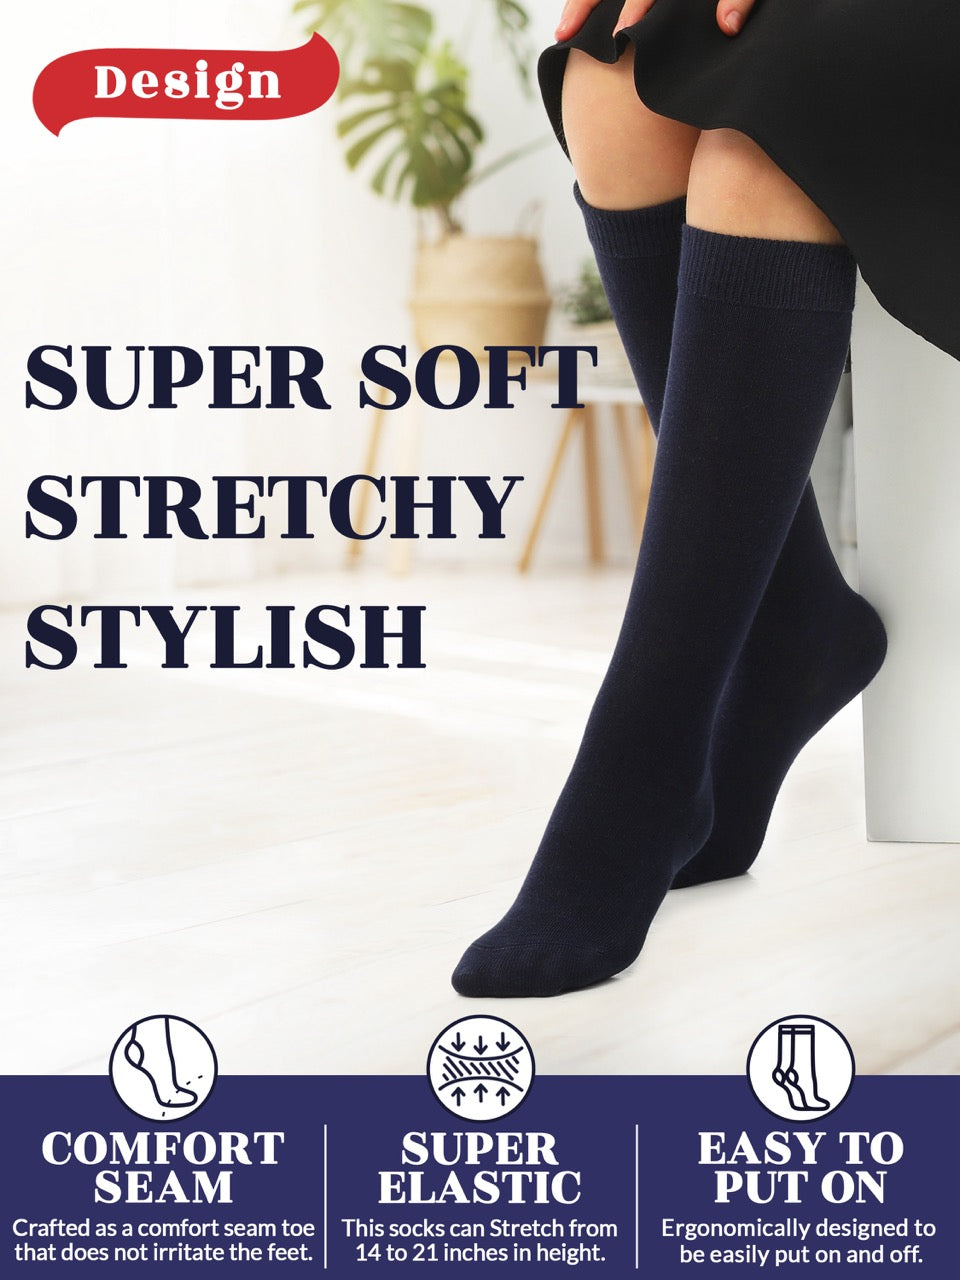 Experience the ultimate comfort and style with Hugh Ugoli Kids Bamboo School Socks. These navy blue socks perfect for school or everyday wear, our high-quality knee-high socks meet uniform standards while reducing blisters and staying in place. Available in four sizes for children aged 3-14 years